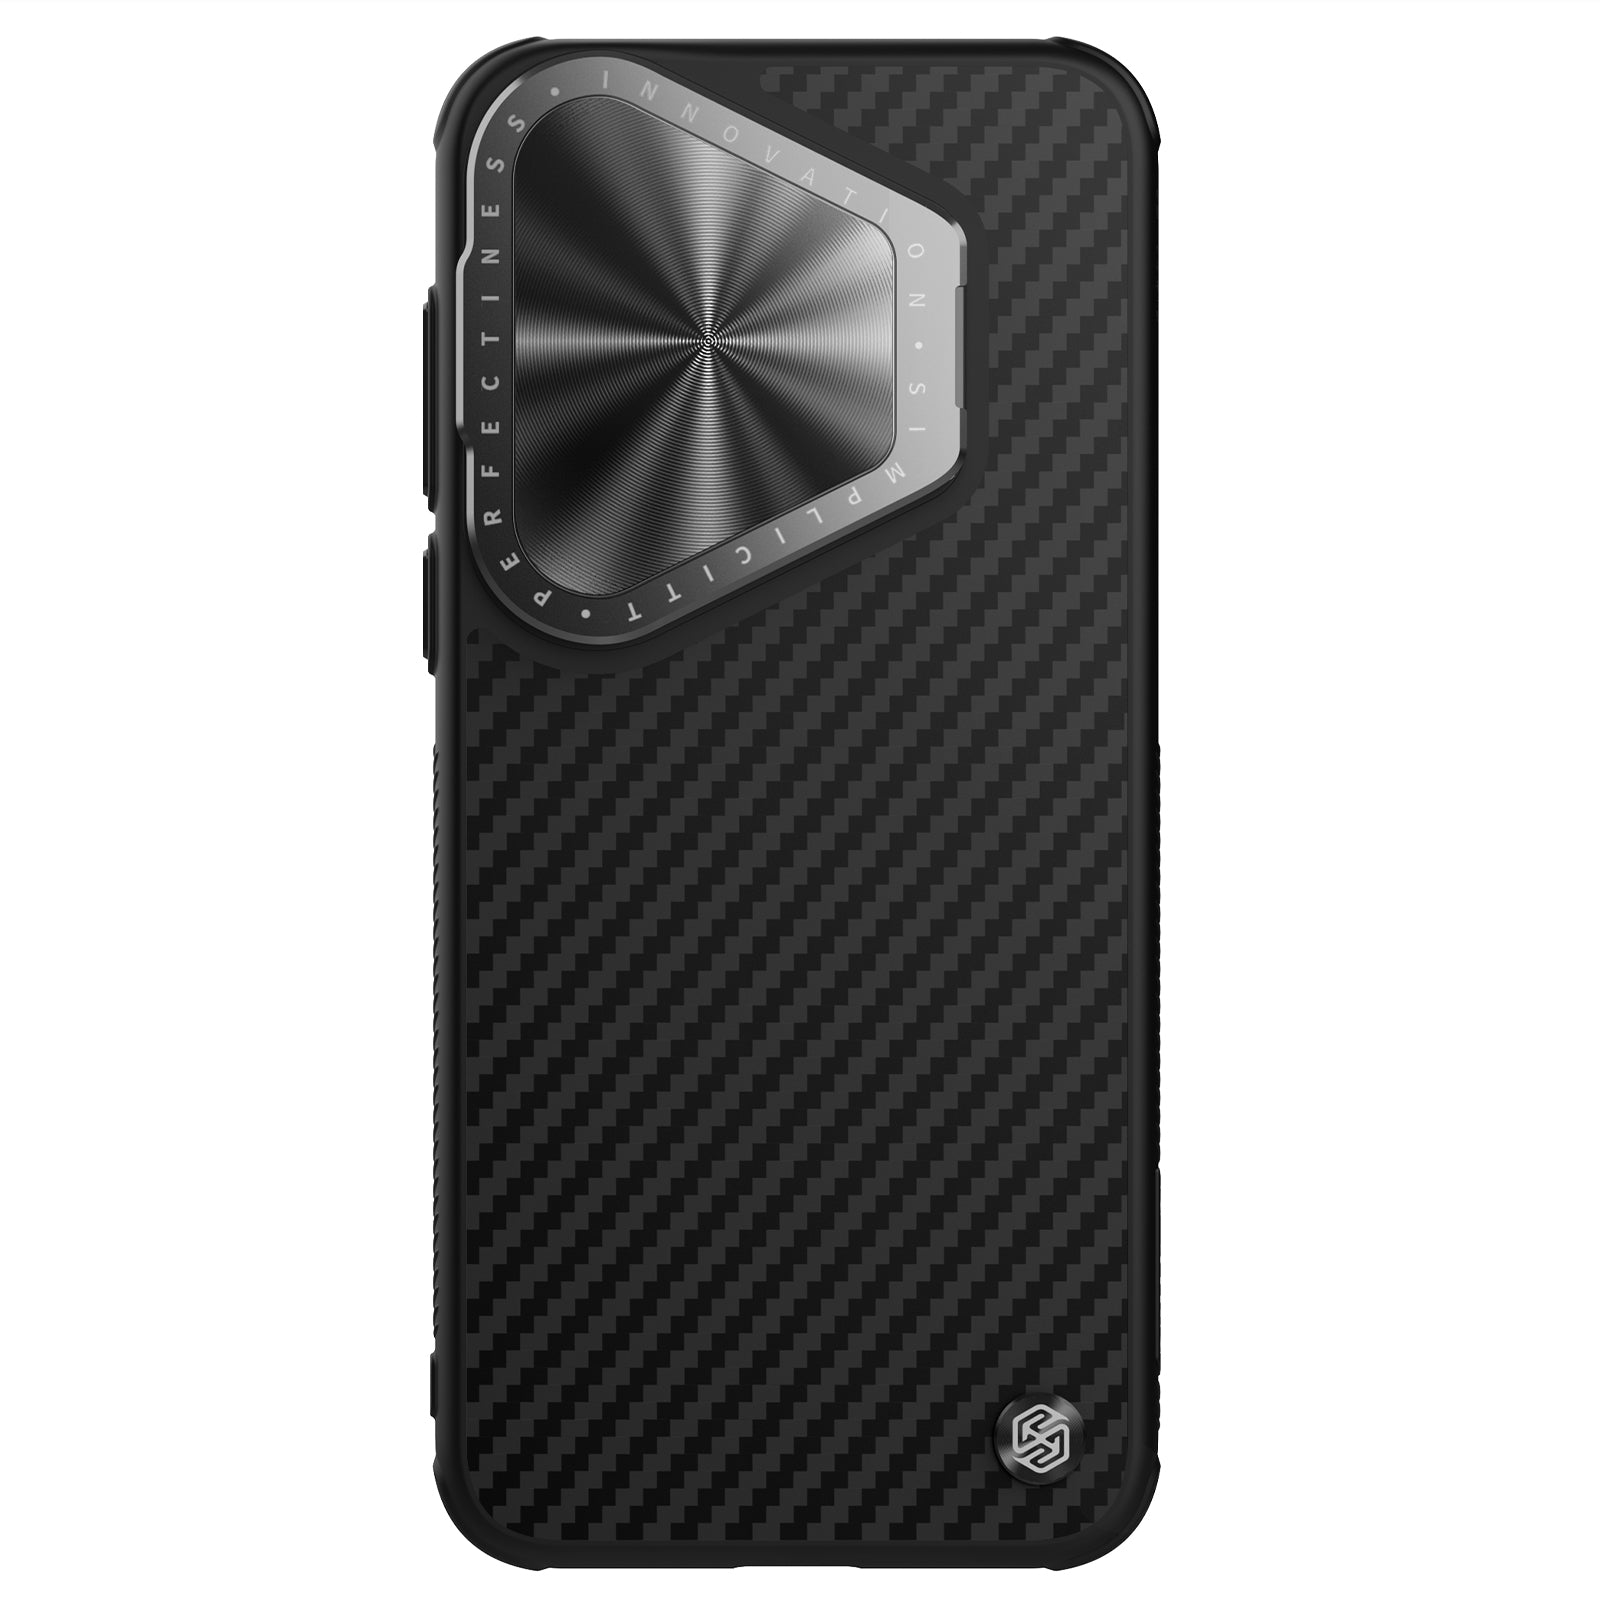 NILLKIN Carboprof Case for Huawei Pura 70 Pro / a 70 Pro+ Case TPU+Aramid Fiber Phone Cover with Lens Lid Kickstand